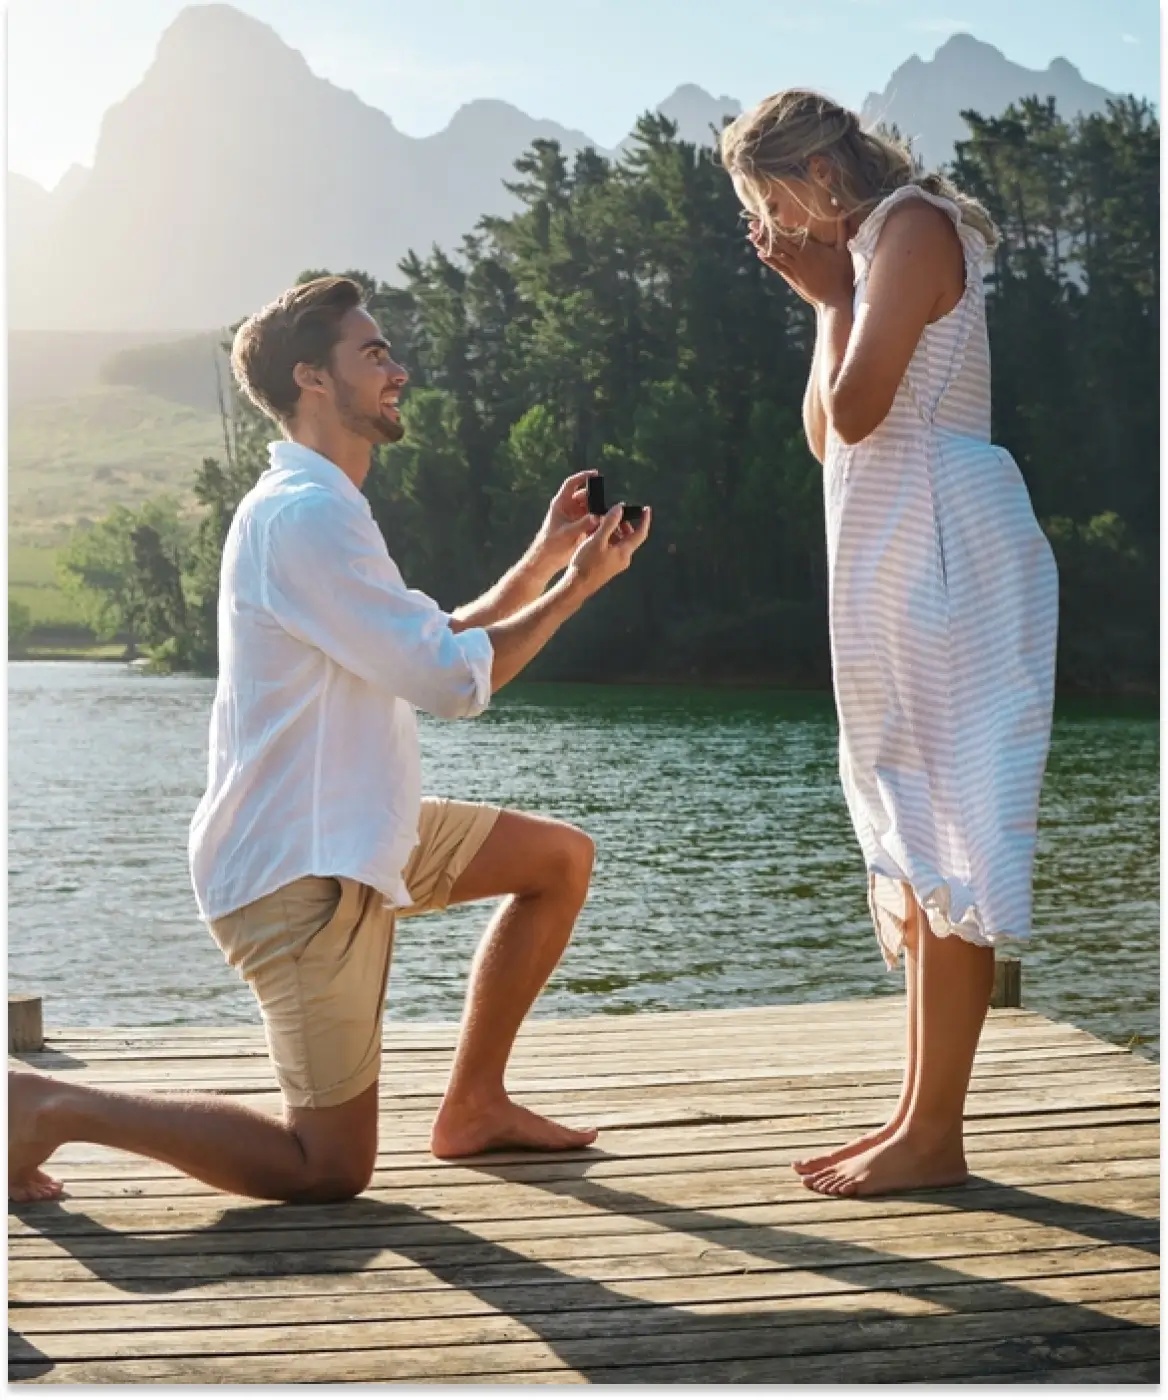 Top 5 Marriage Proposal Ideas made better with a Diamond